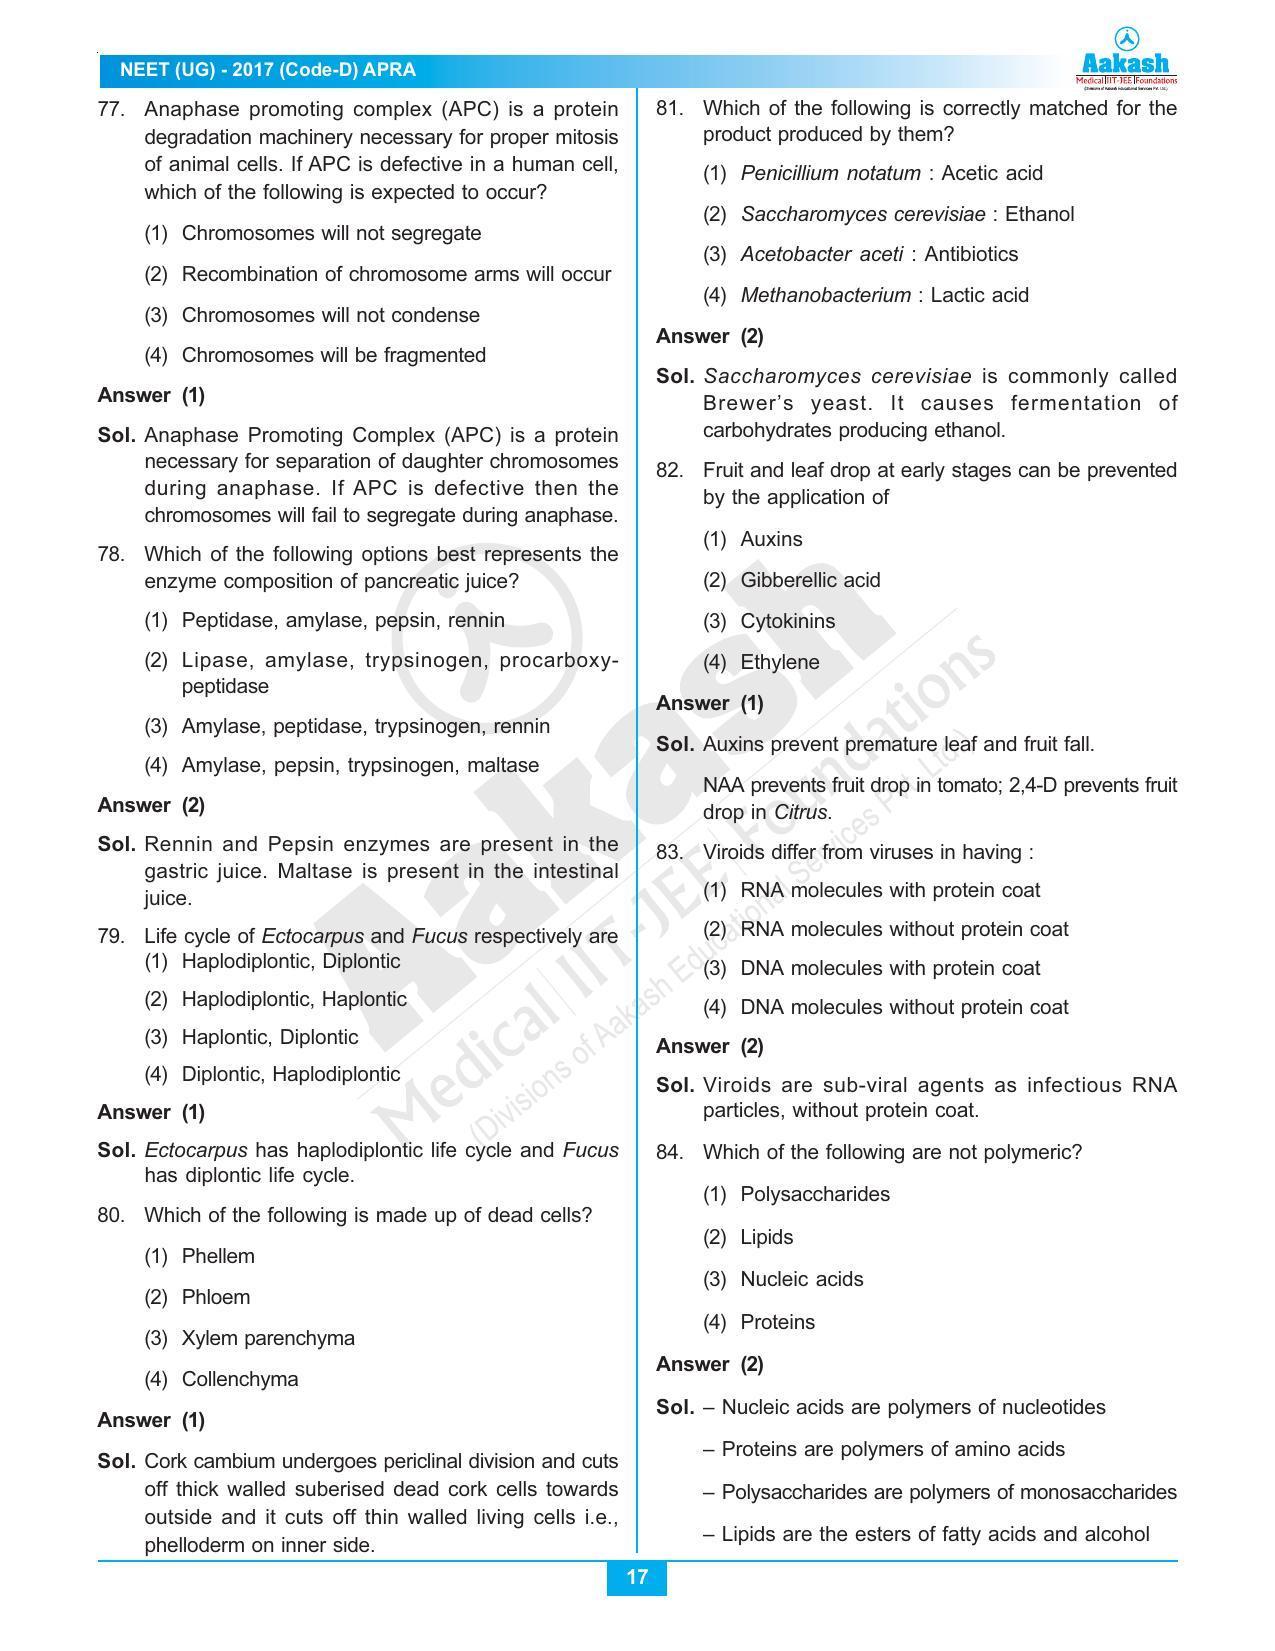  NEET Code D 2017 Answer & Solutions - Page 17